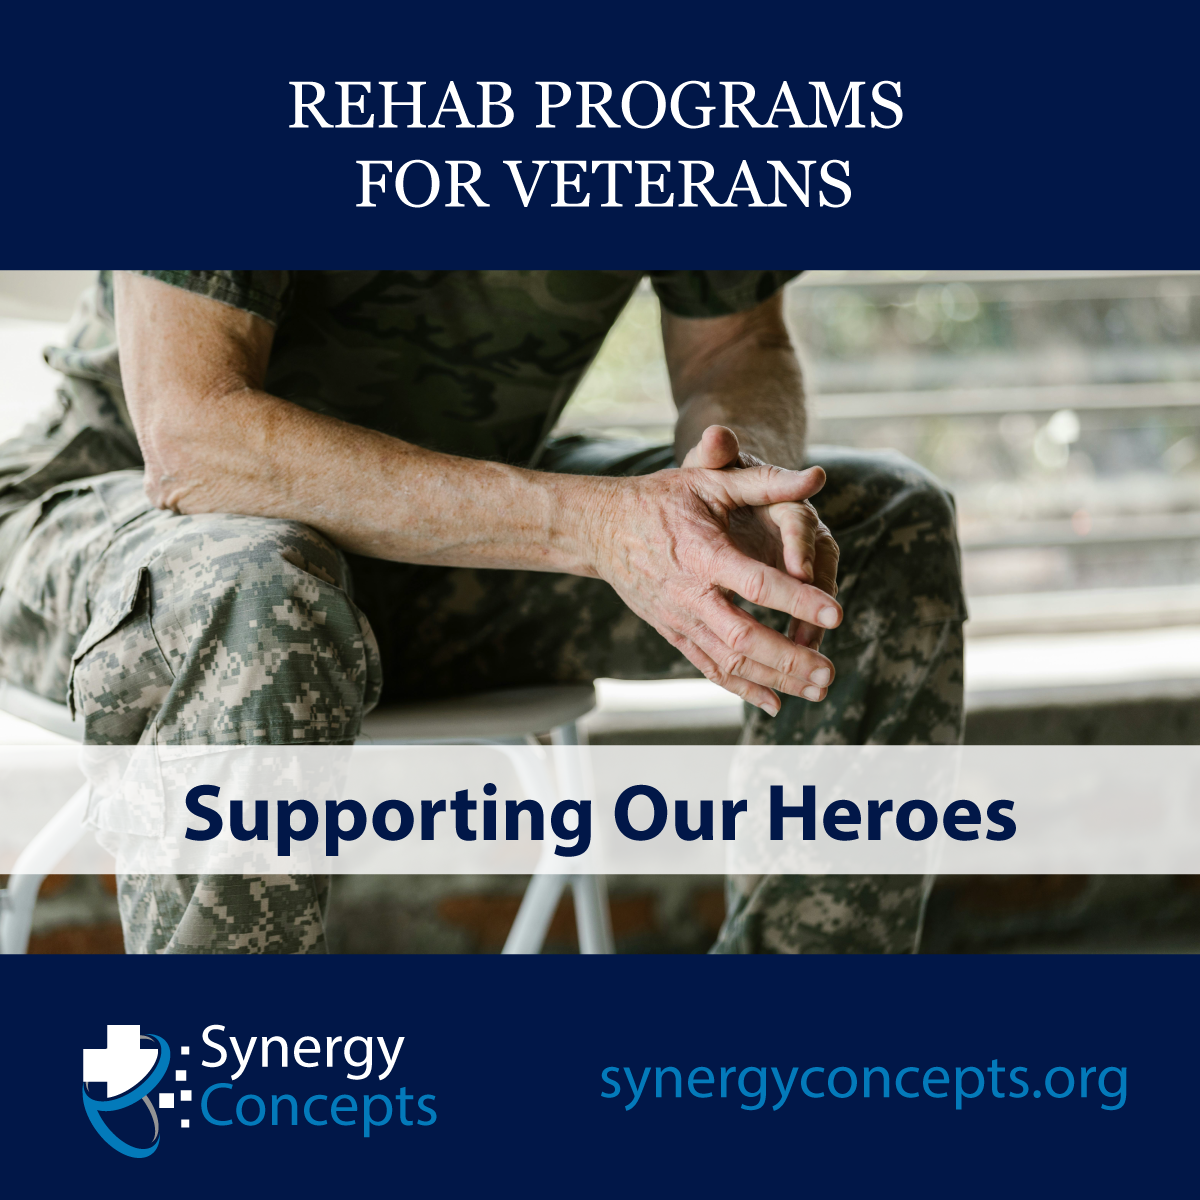 VA Addiction Treatment: Supporting Our Veterans on the Path to Recovery - Synergy Concepts behavioral health medical billing and coding